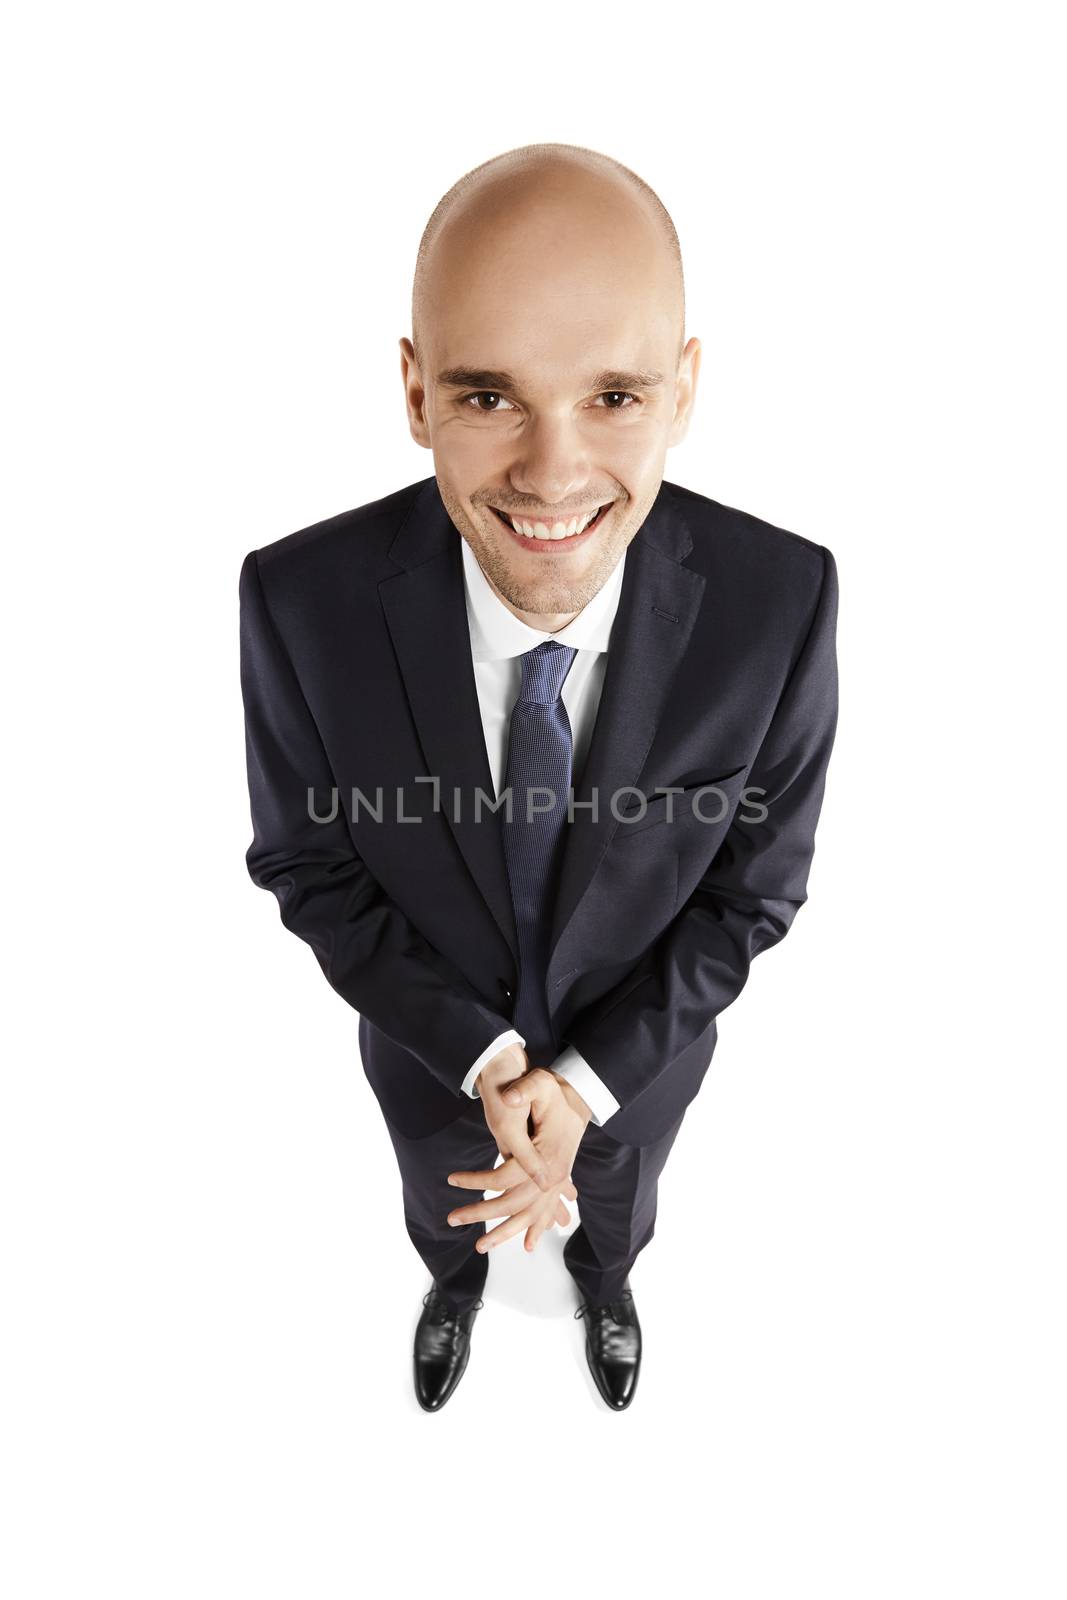 Overhead view of a satisfied man. Portrait isolated on white background.